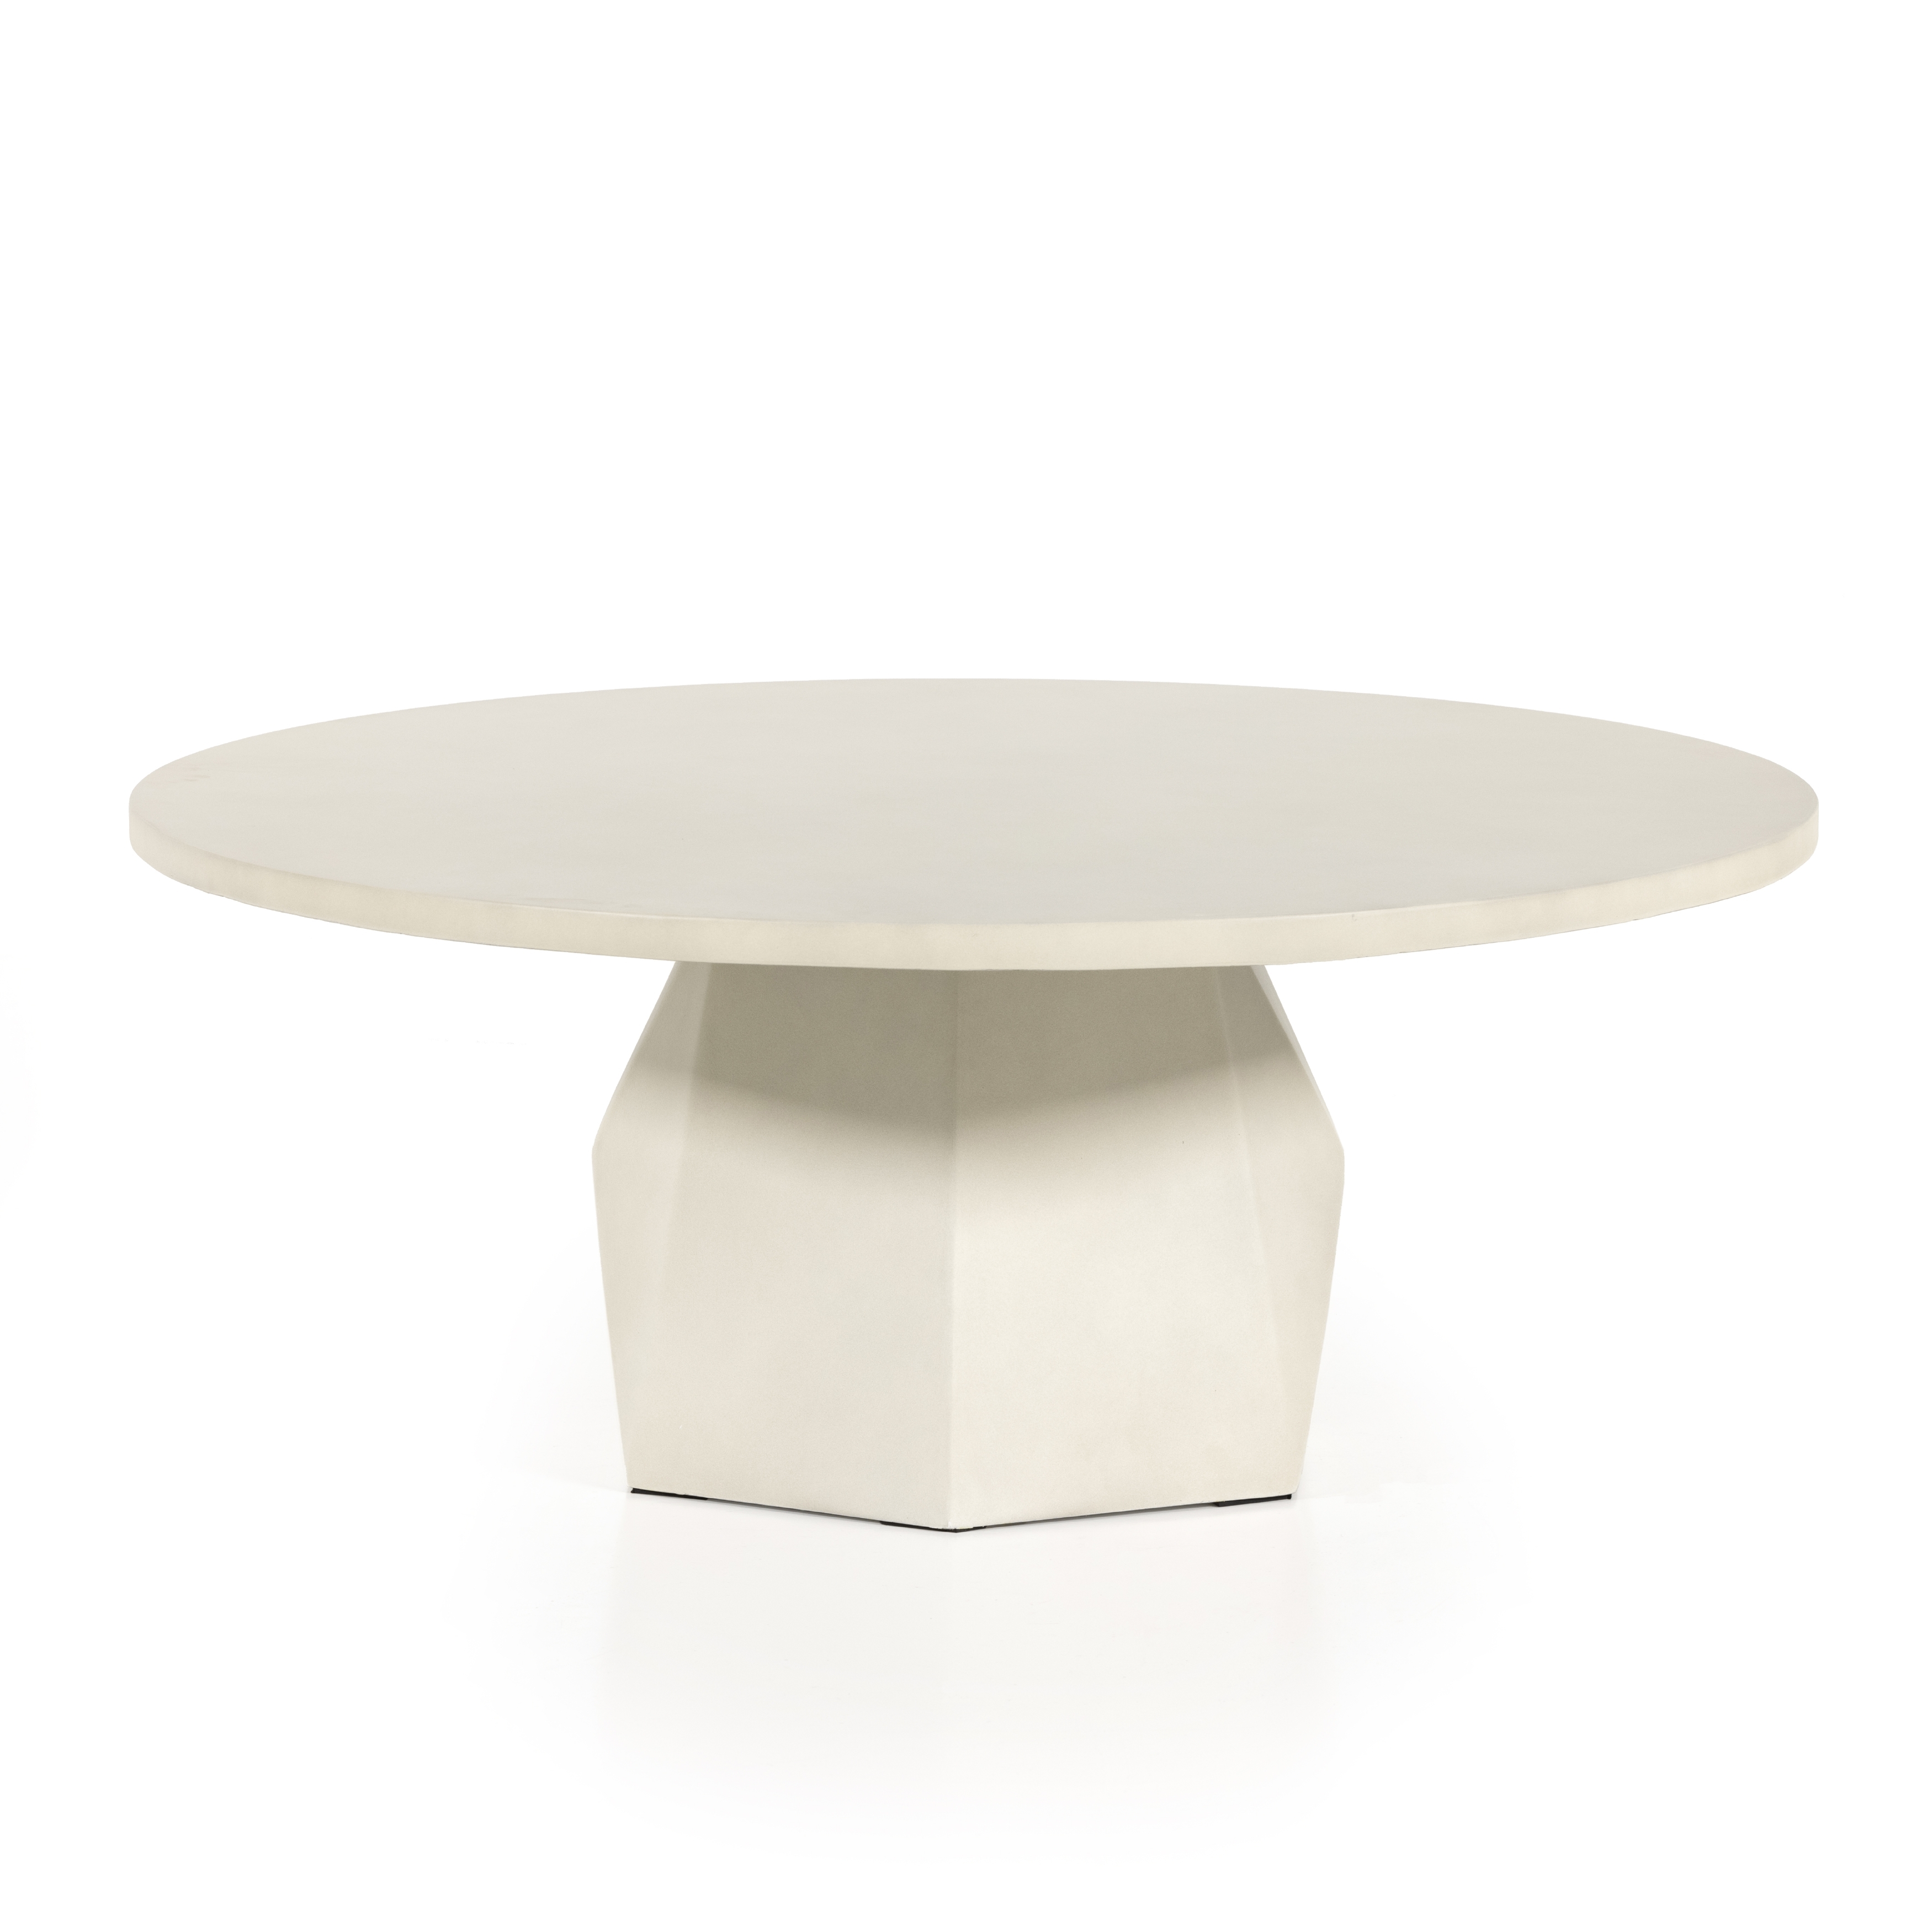 Bowman Outdoor Coffee Table-White Cncrt - Image 2